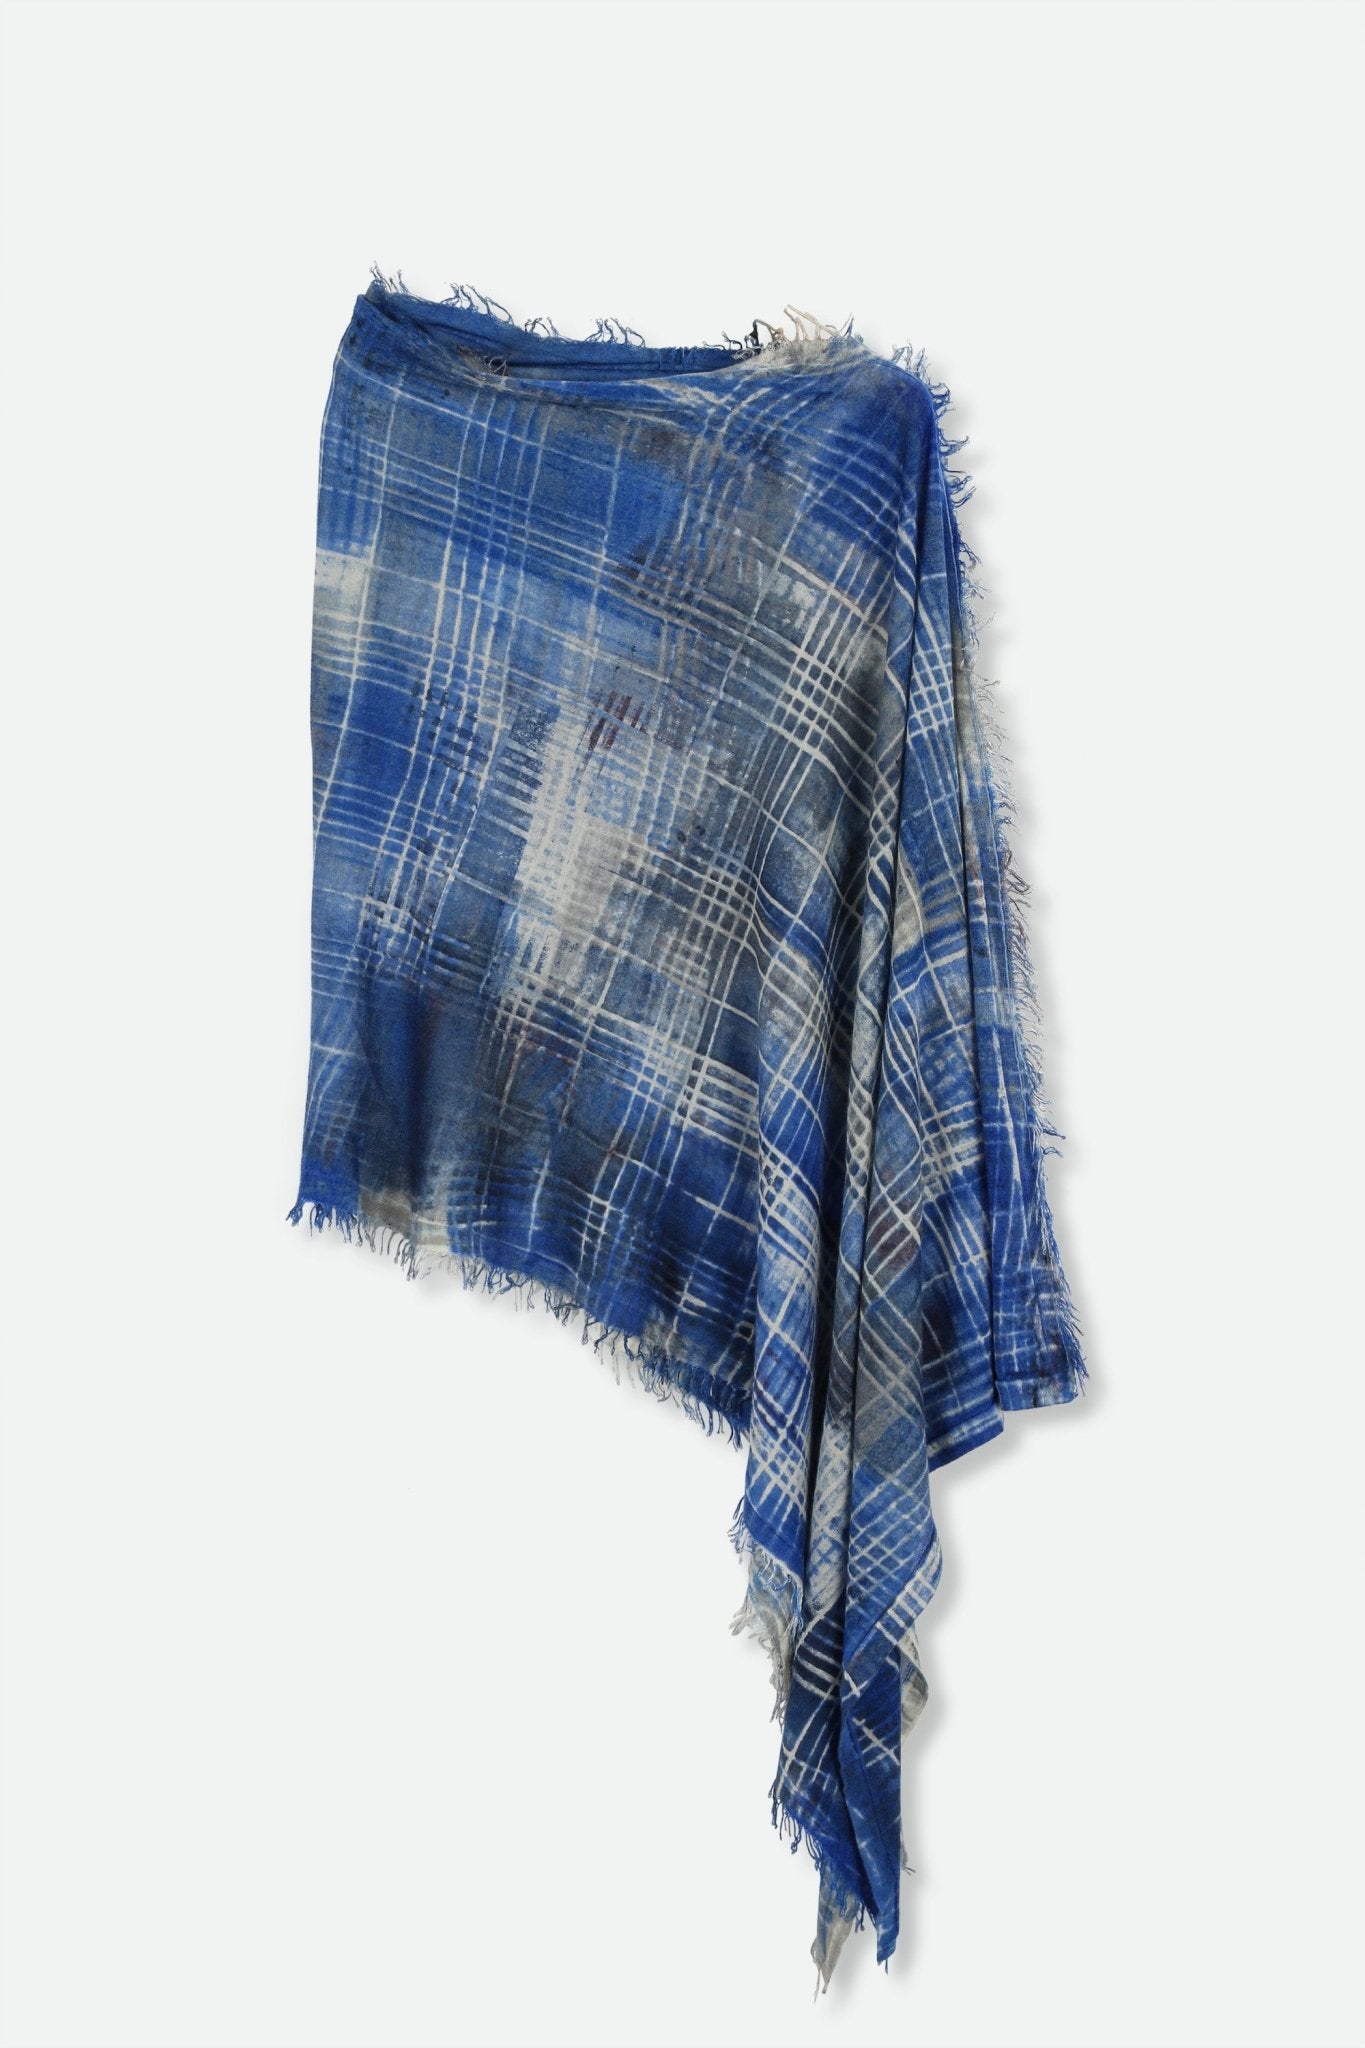 BALI IN HAND DYED CARRIAGI CASHMERE FRINGE CERULEAN LINEA - Jarbo